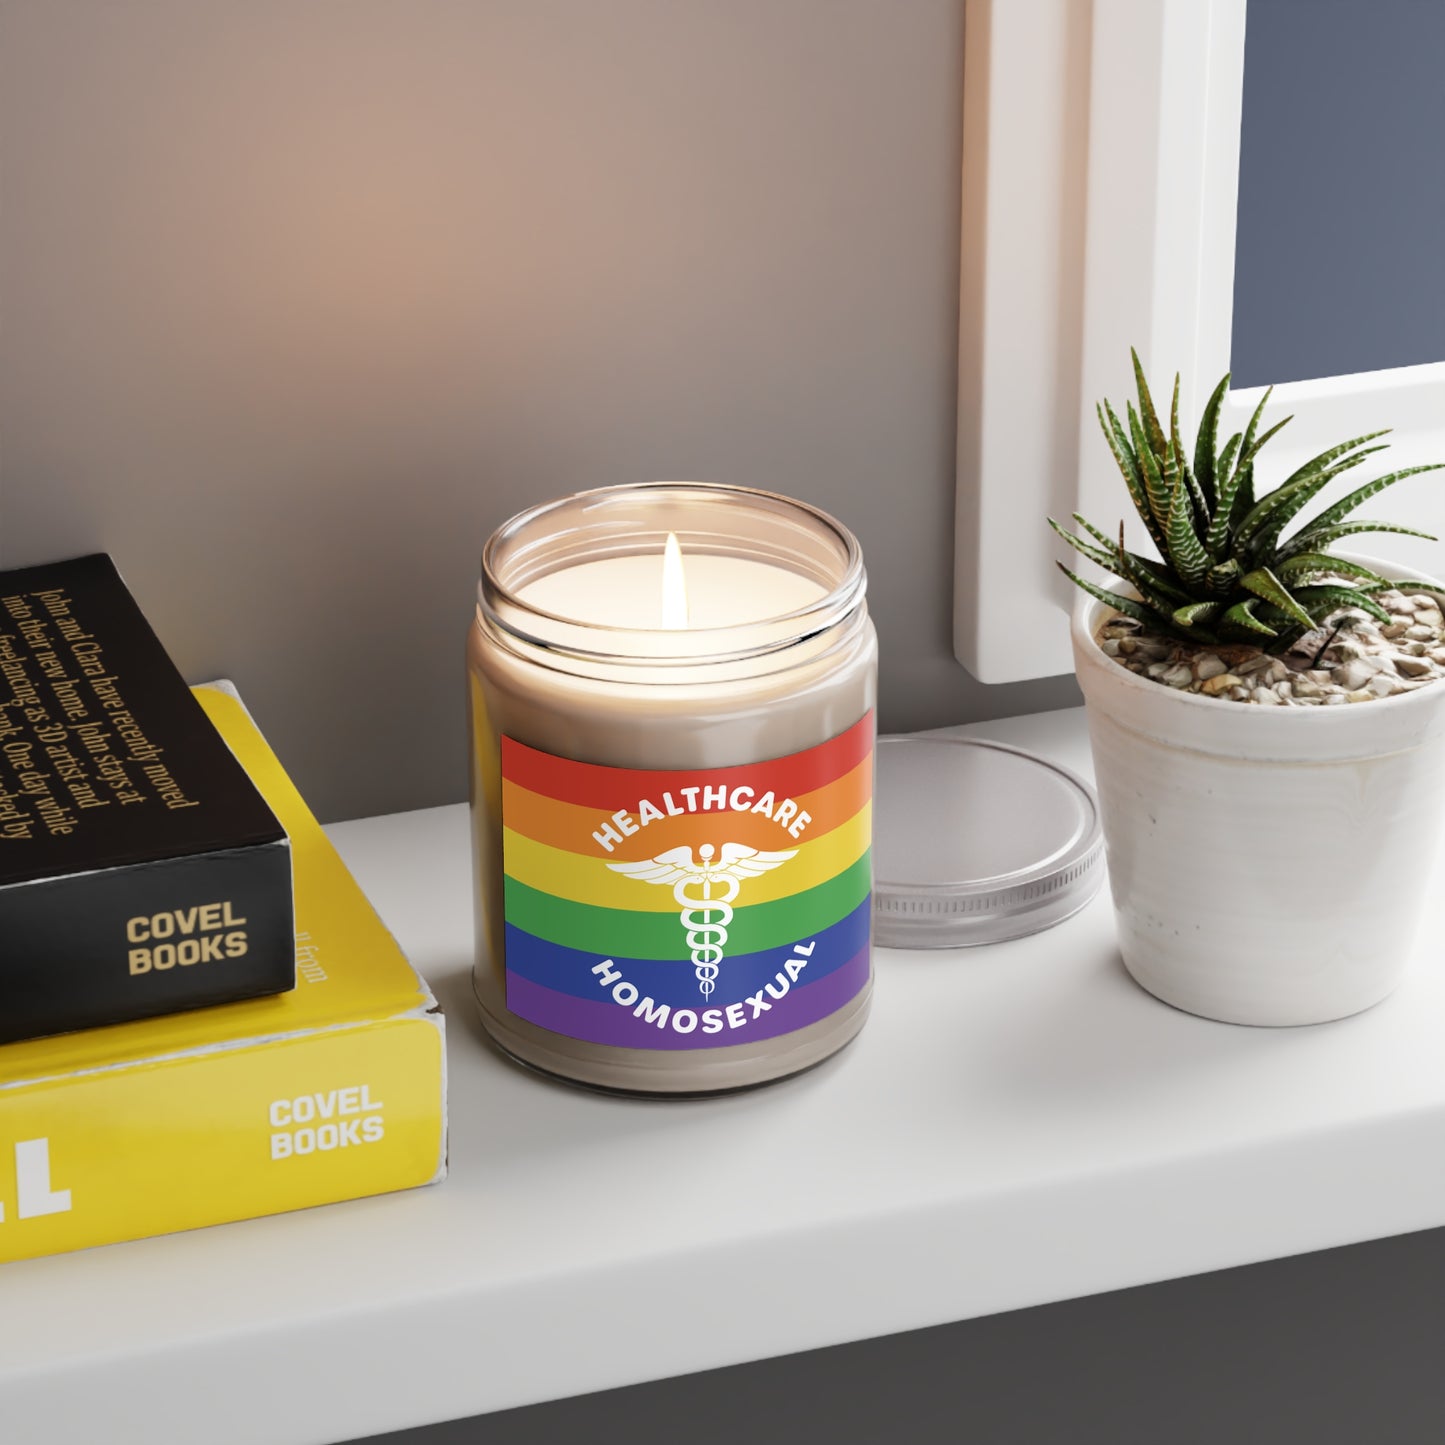 Healthcare Homosexual Caduceus - Scented Candle